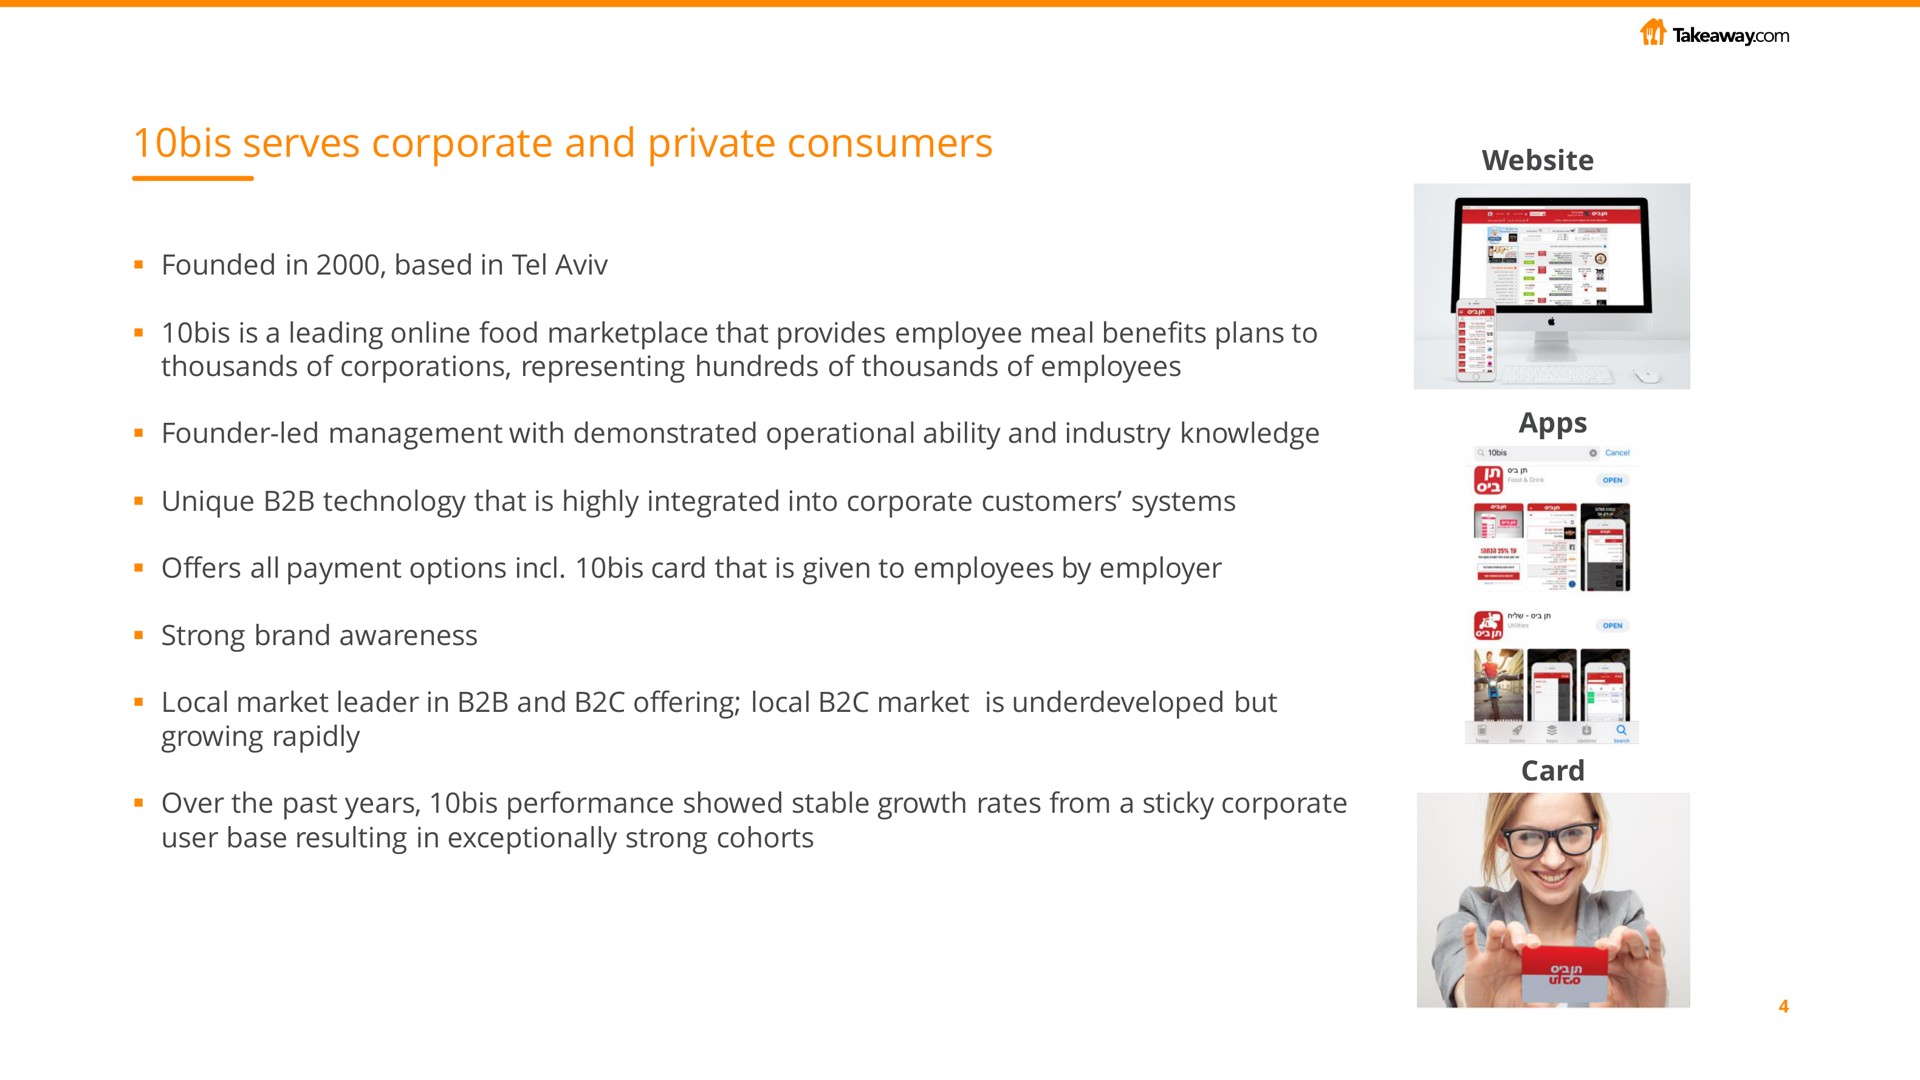 bis serves corporate and private consumers | Just Eat Takeaway.com